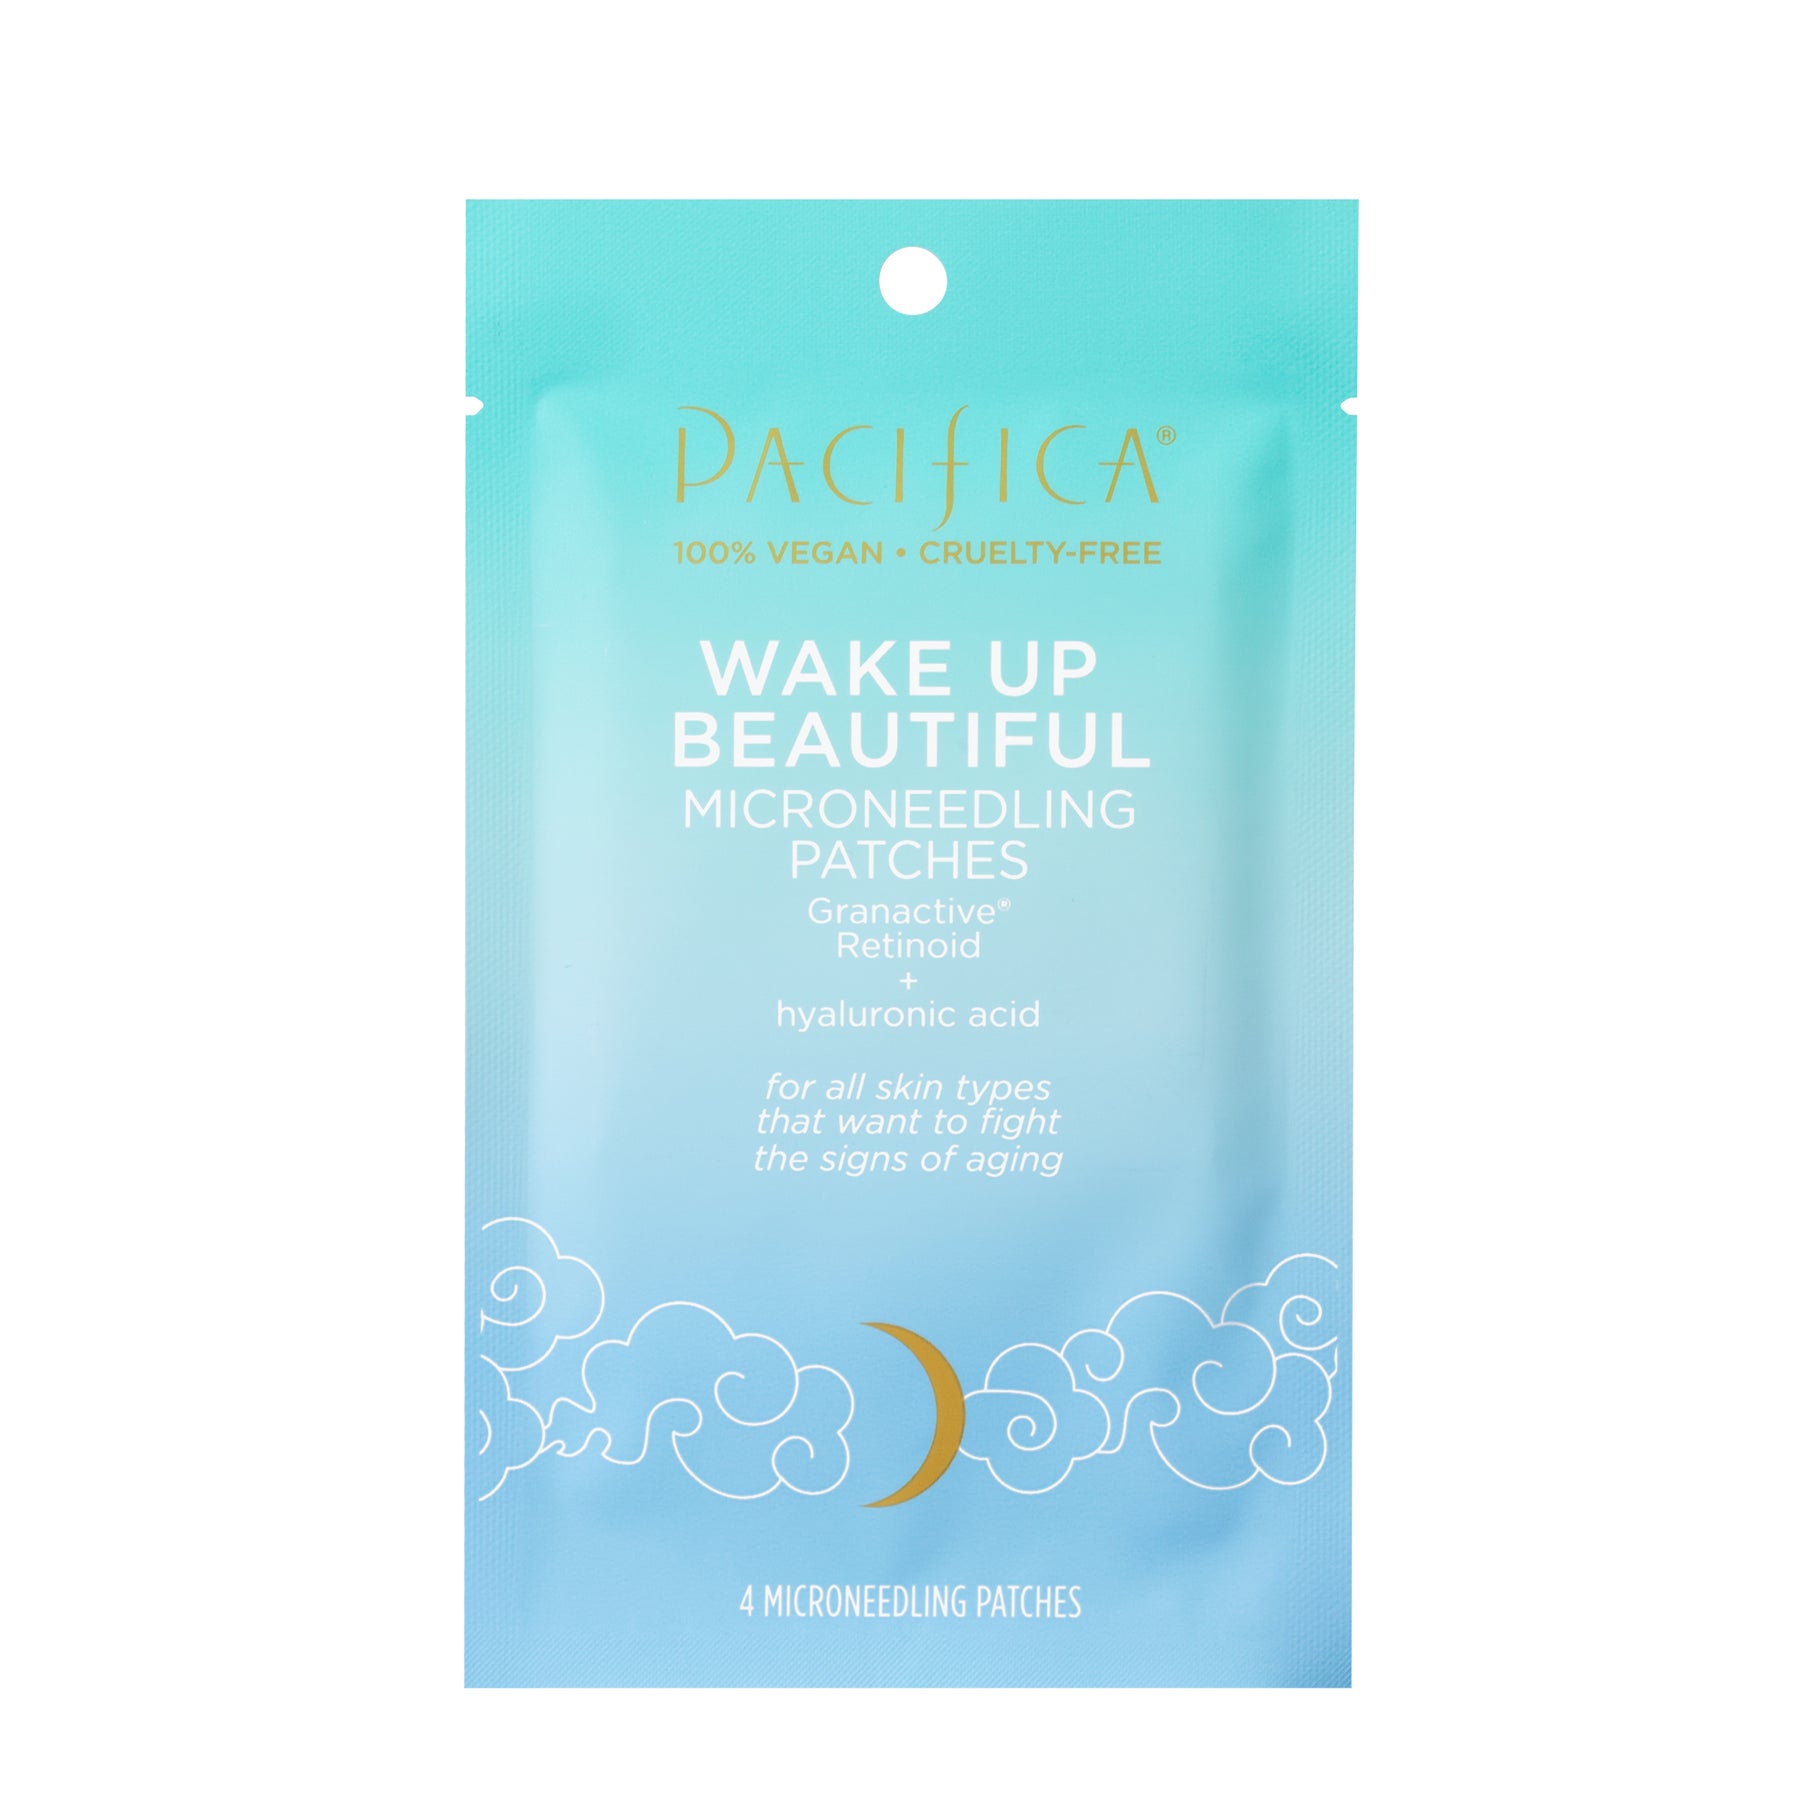 Wake Up Beautiful Microneedling Patches - Skin Care - Pacifica Beauty